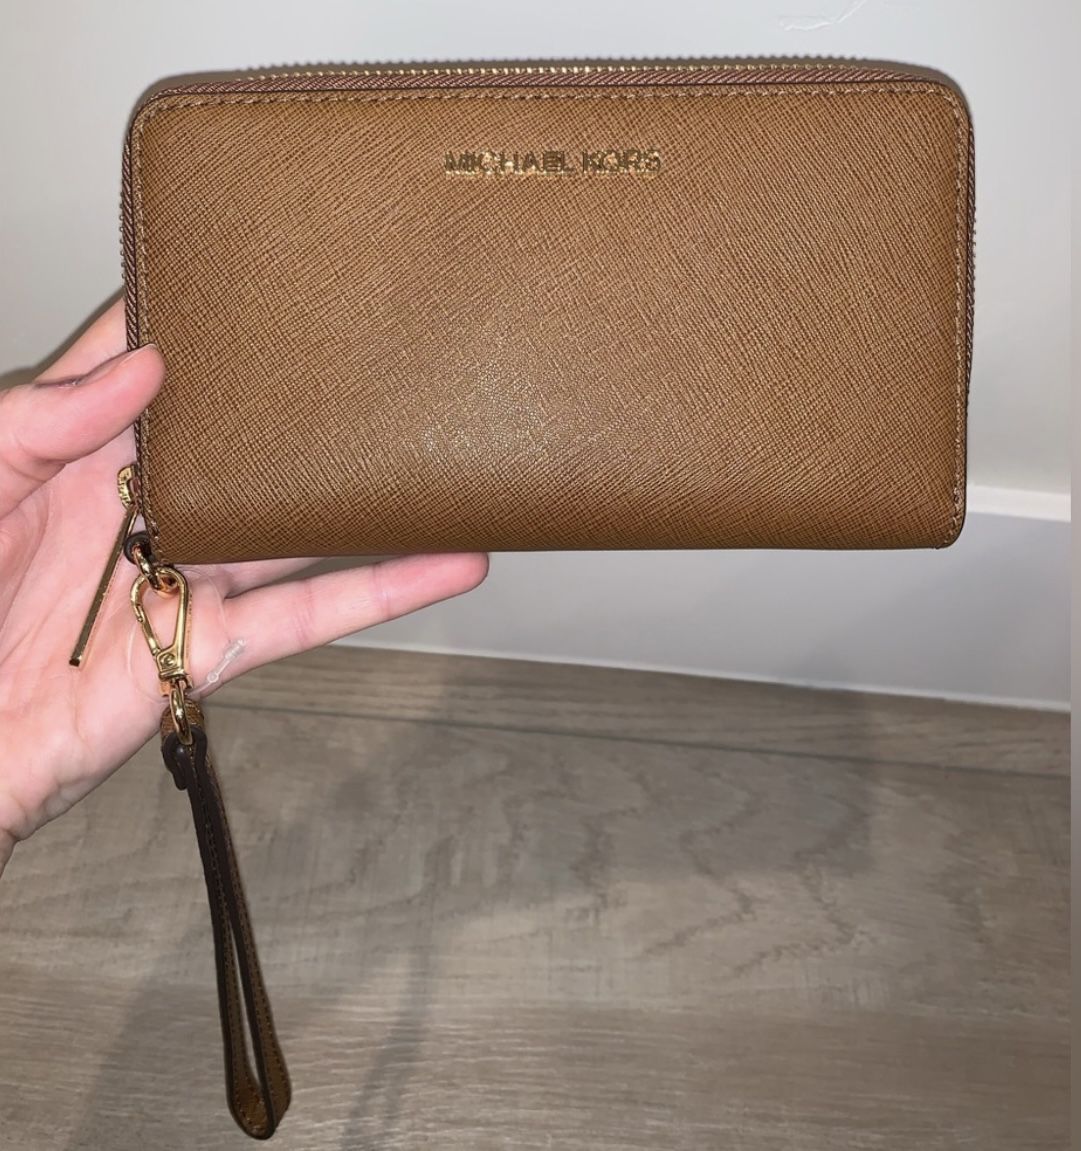 Michael Kors Wallet - Brand New With Tags